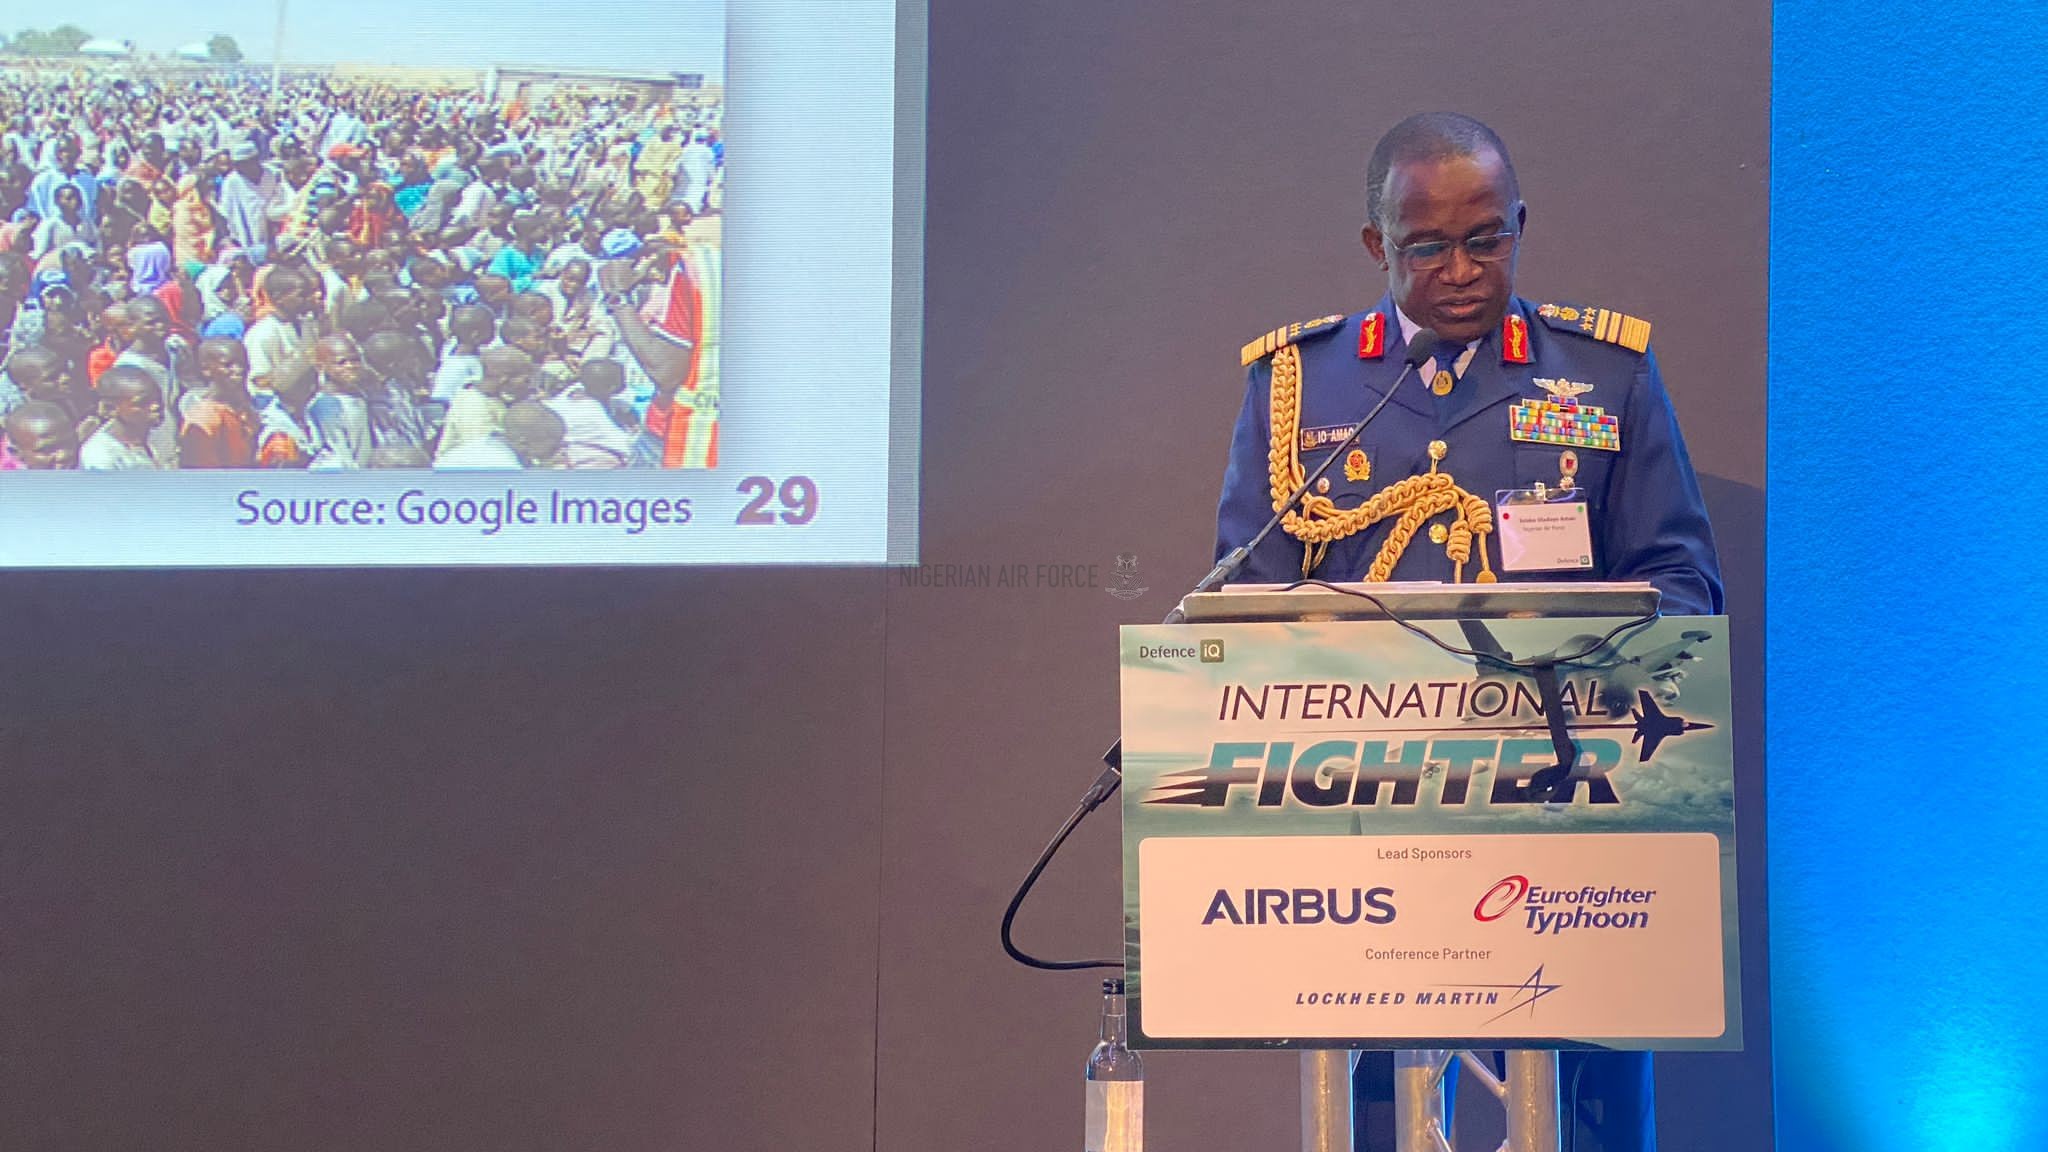 CAS AT FIGHTER CONFERENCE IN LONDON, SPEAKS ON AIR POWER STRATEGIES ADOPTED TO TACKLE INSECURITY